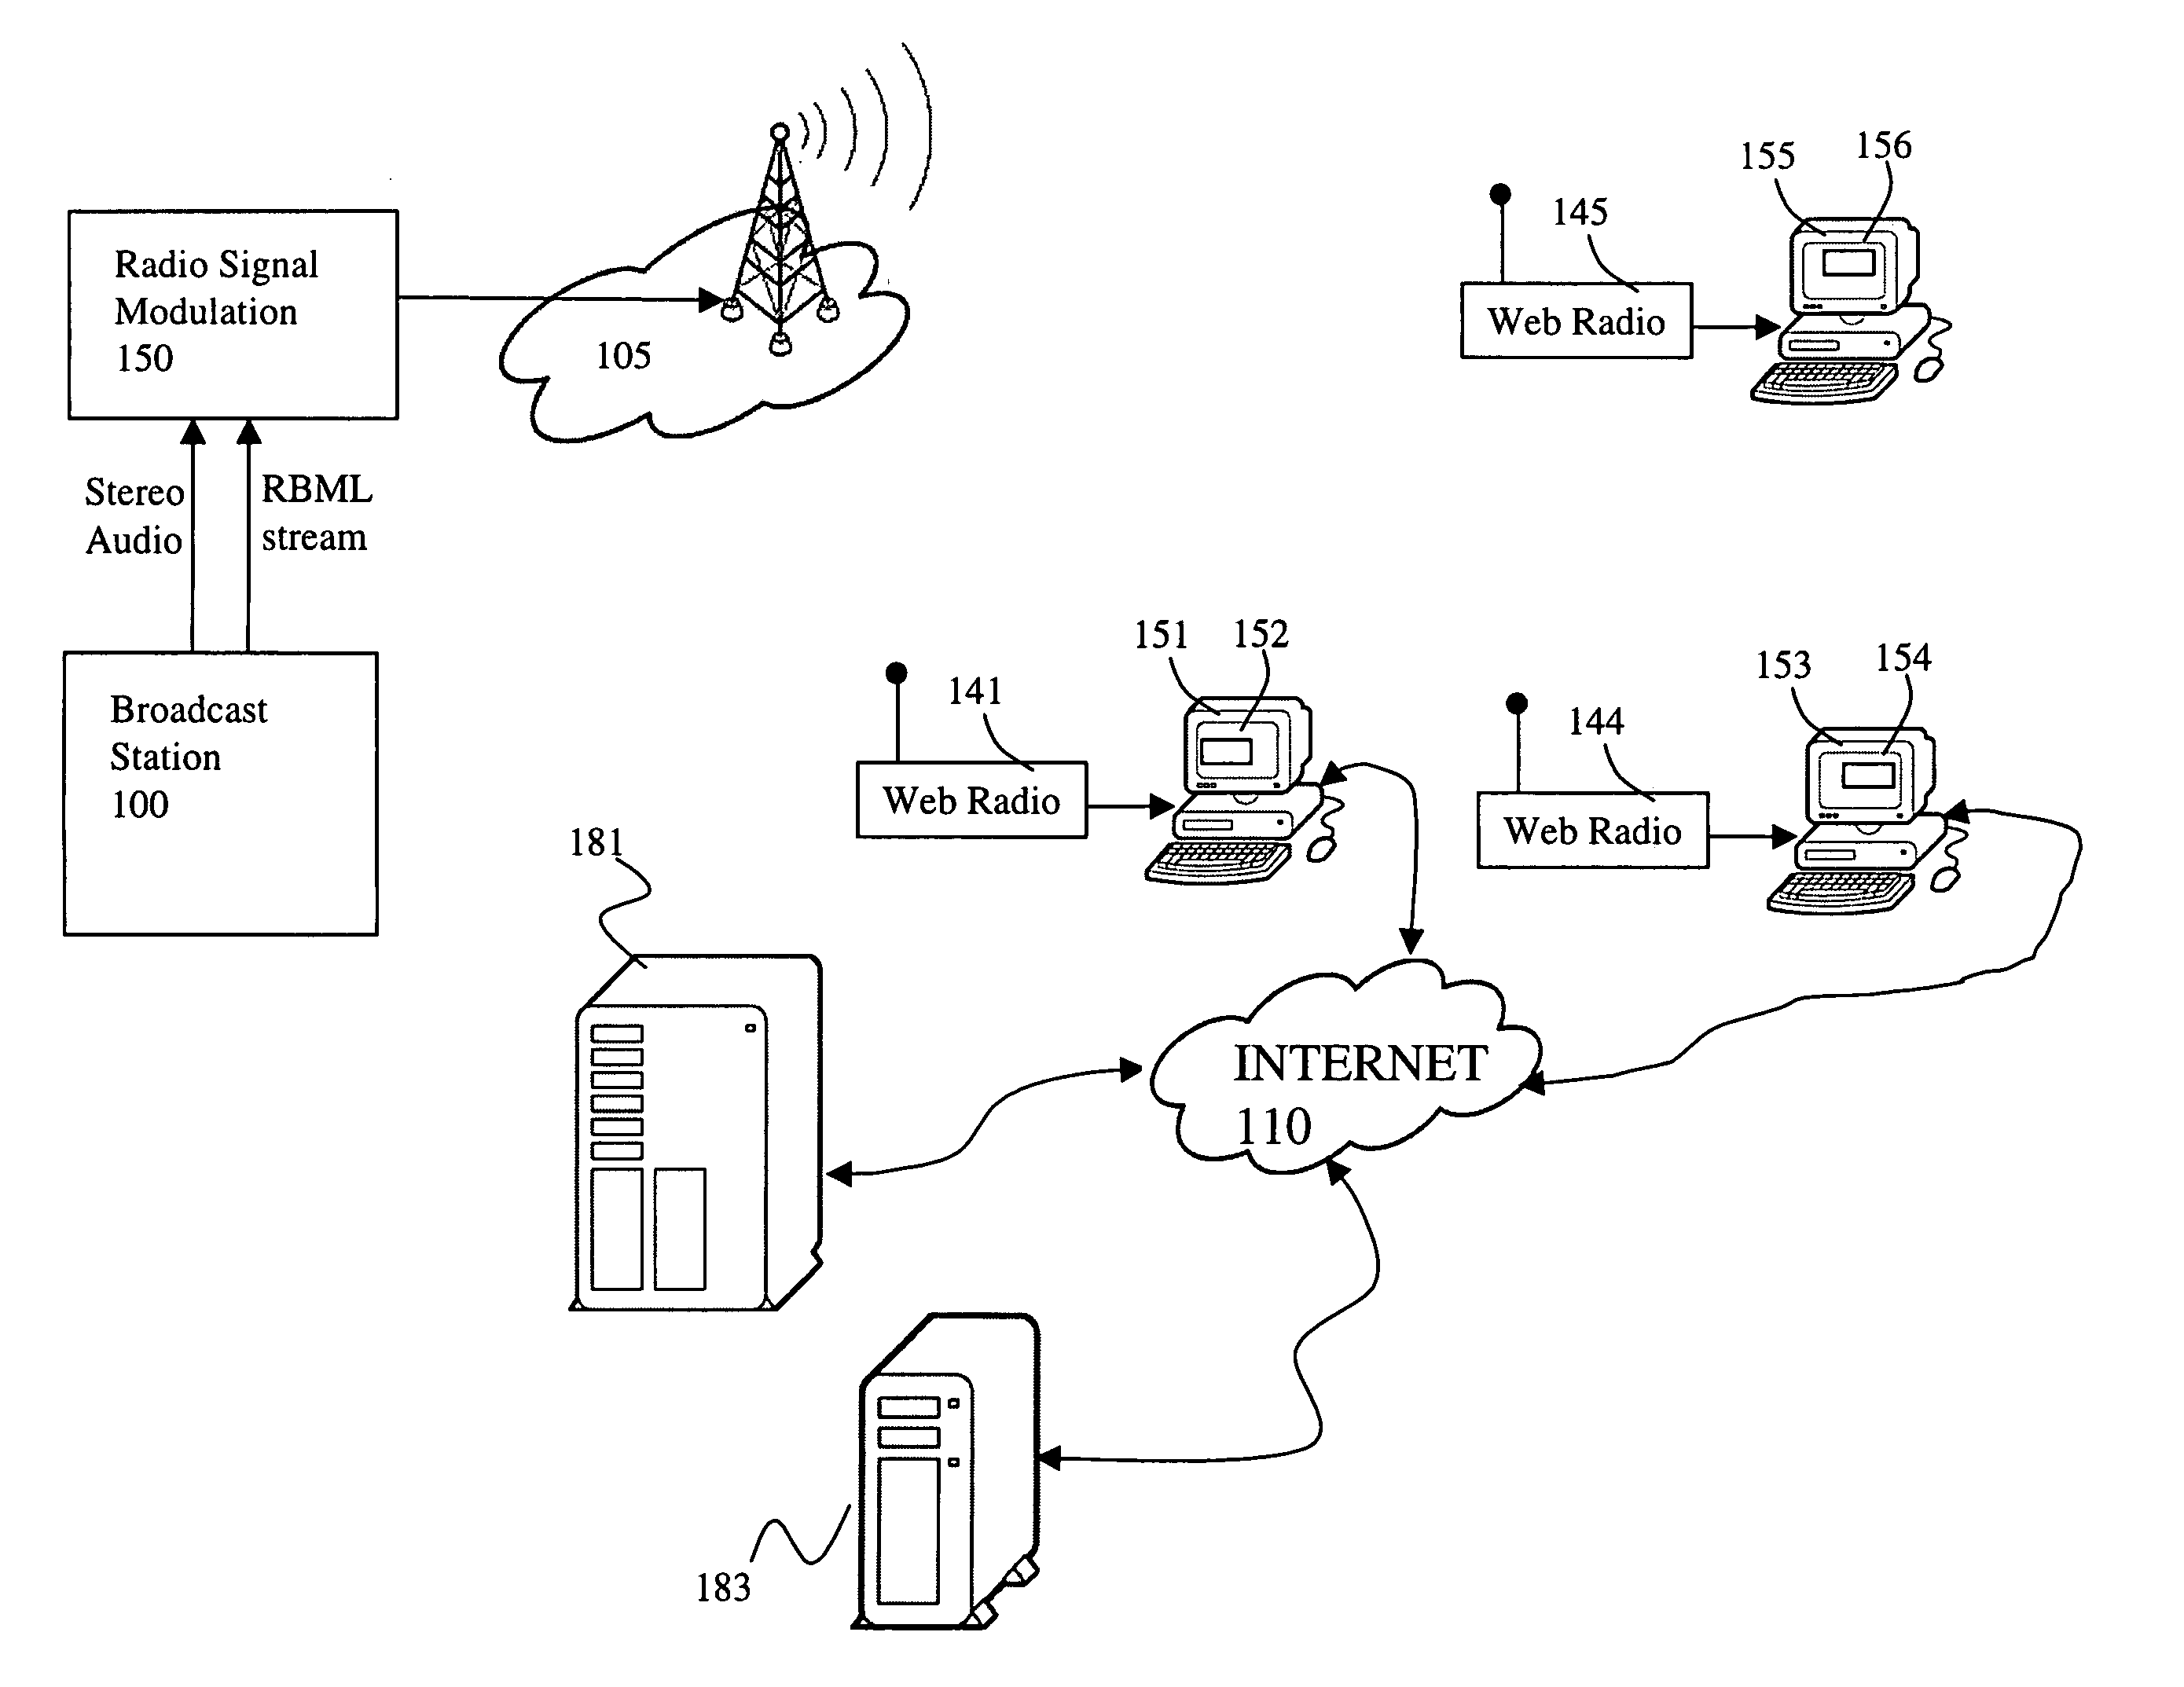 Method and apparatus for an interactive Web Radio system that broadcasts a digital markup language